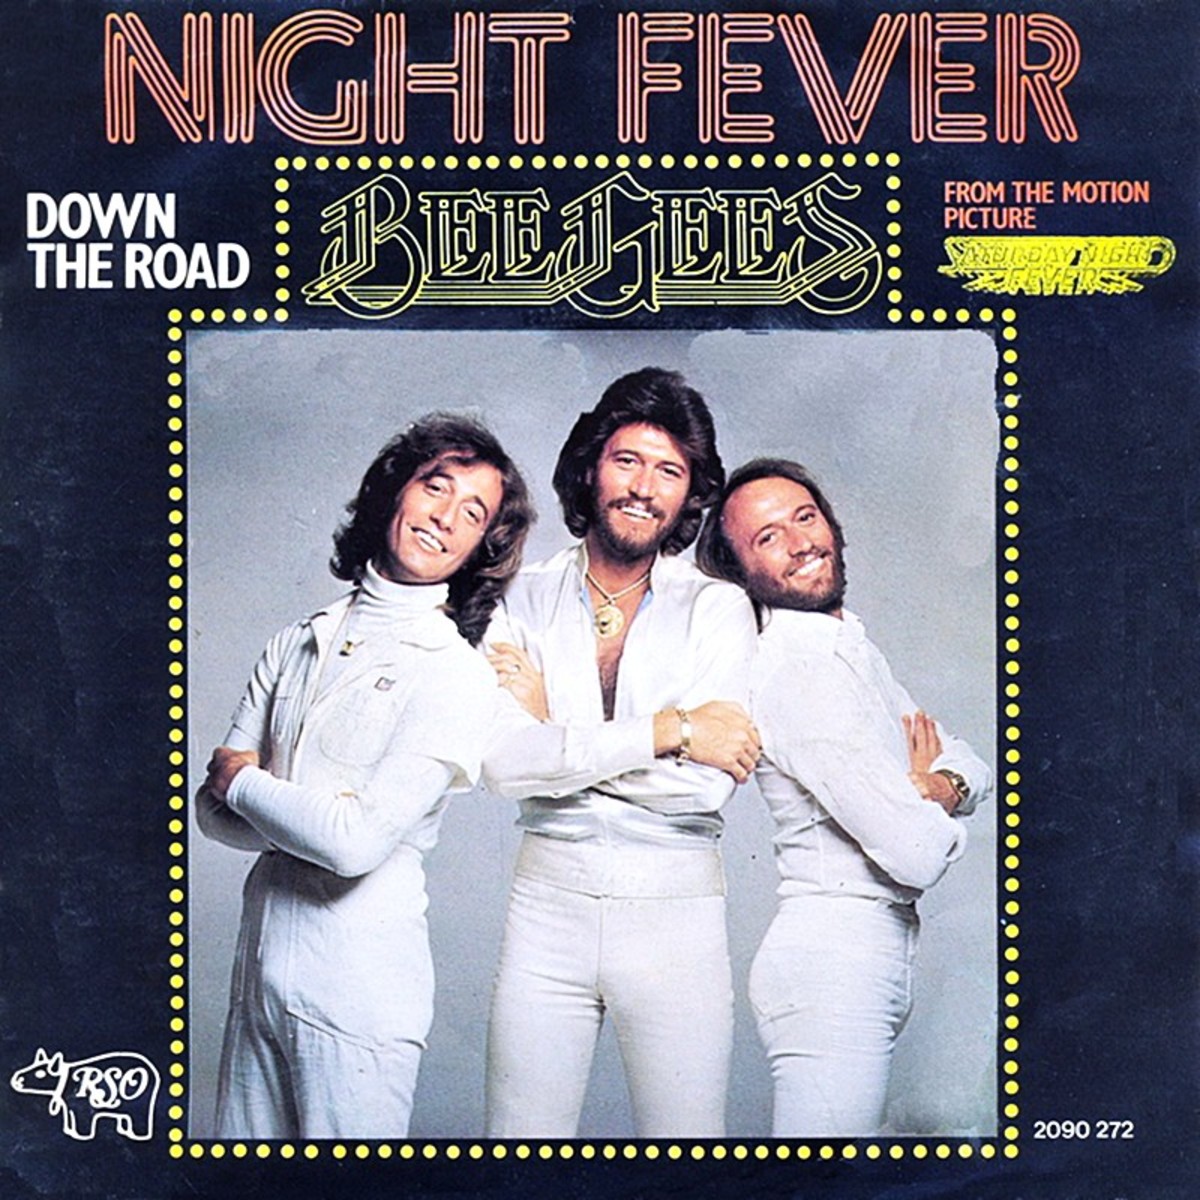 In 1978, the top song was Night Fever by the Bee Gees.